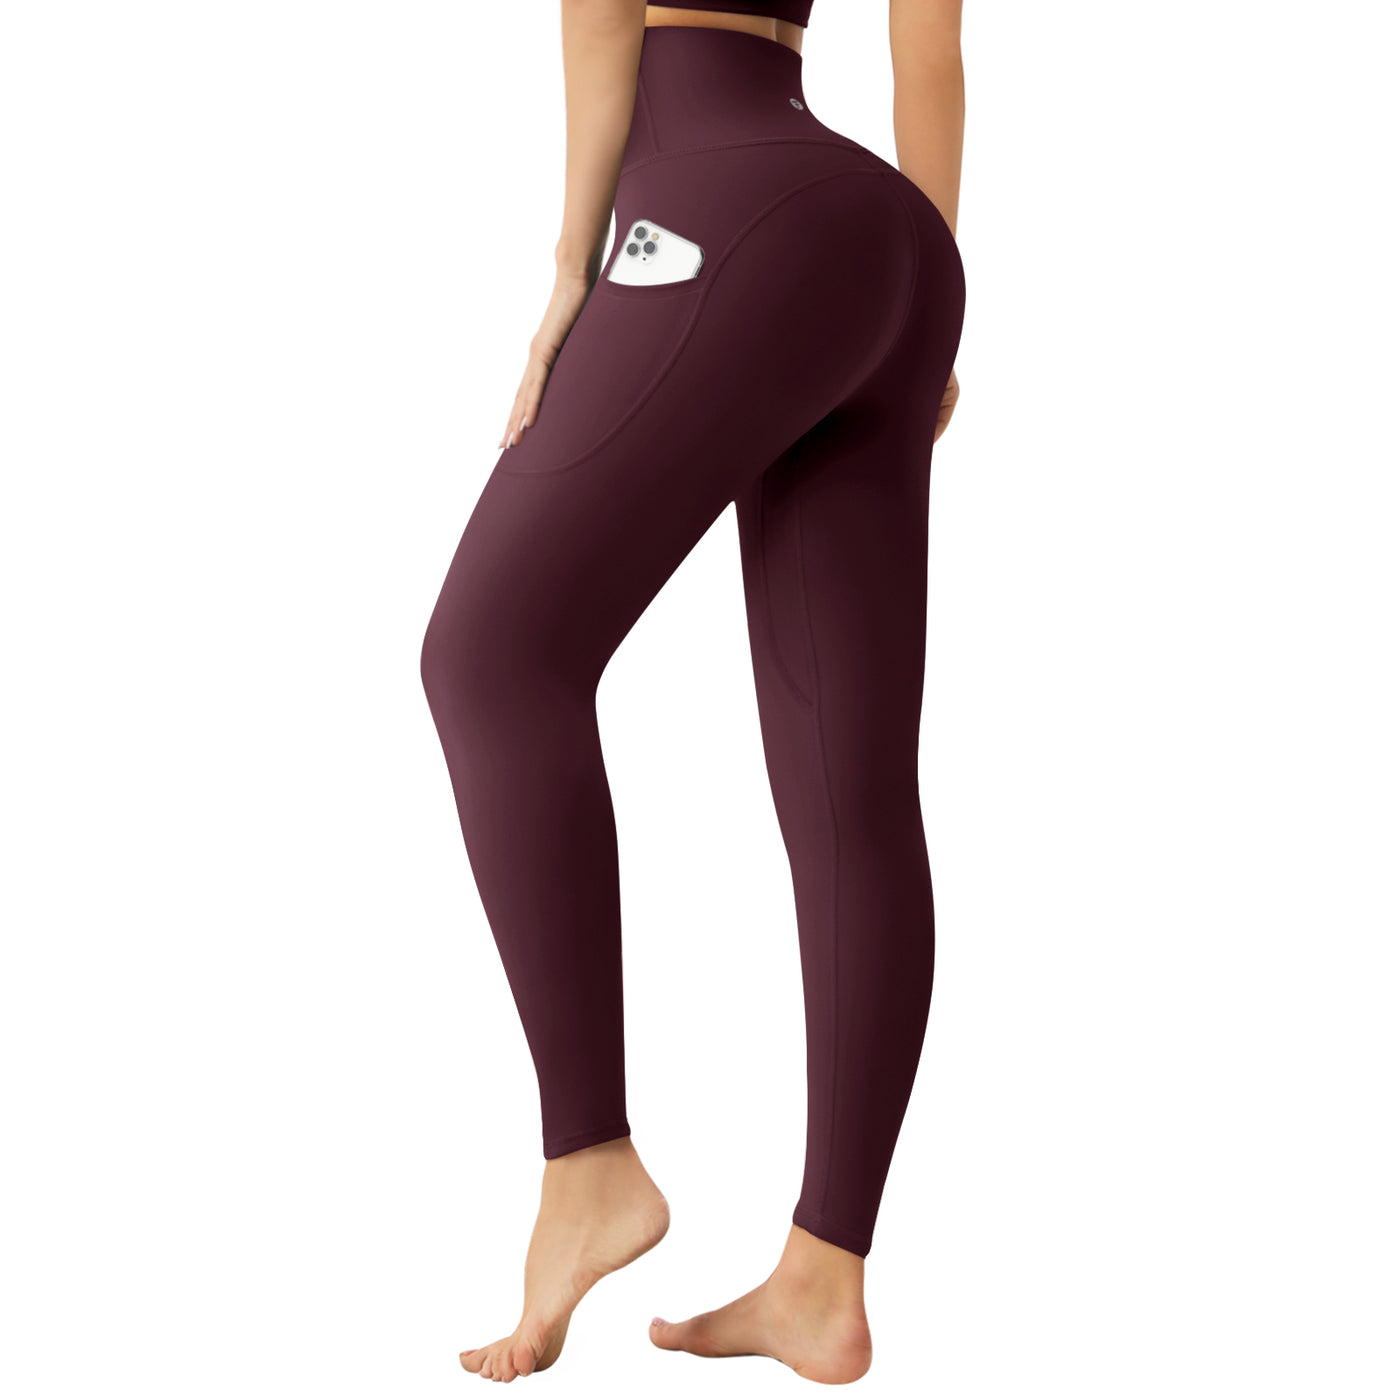 Letsfit Size Large Anti-Cellulite Leggings Ruched Workout, Yoga